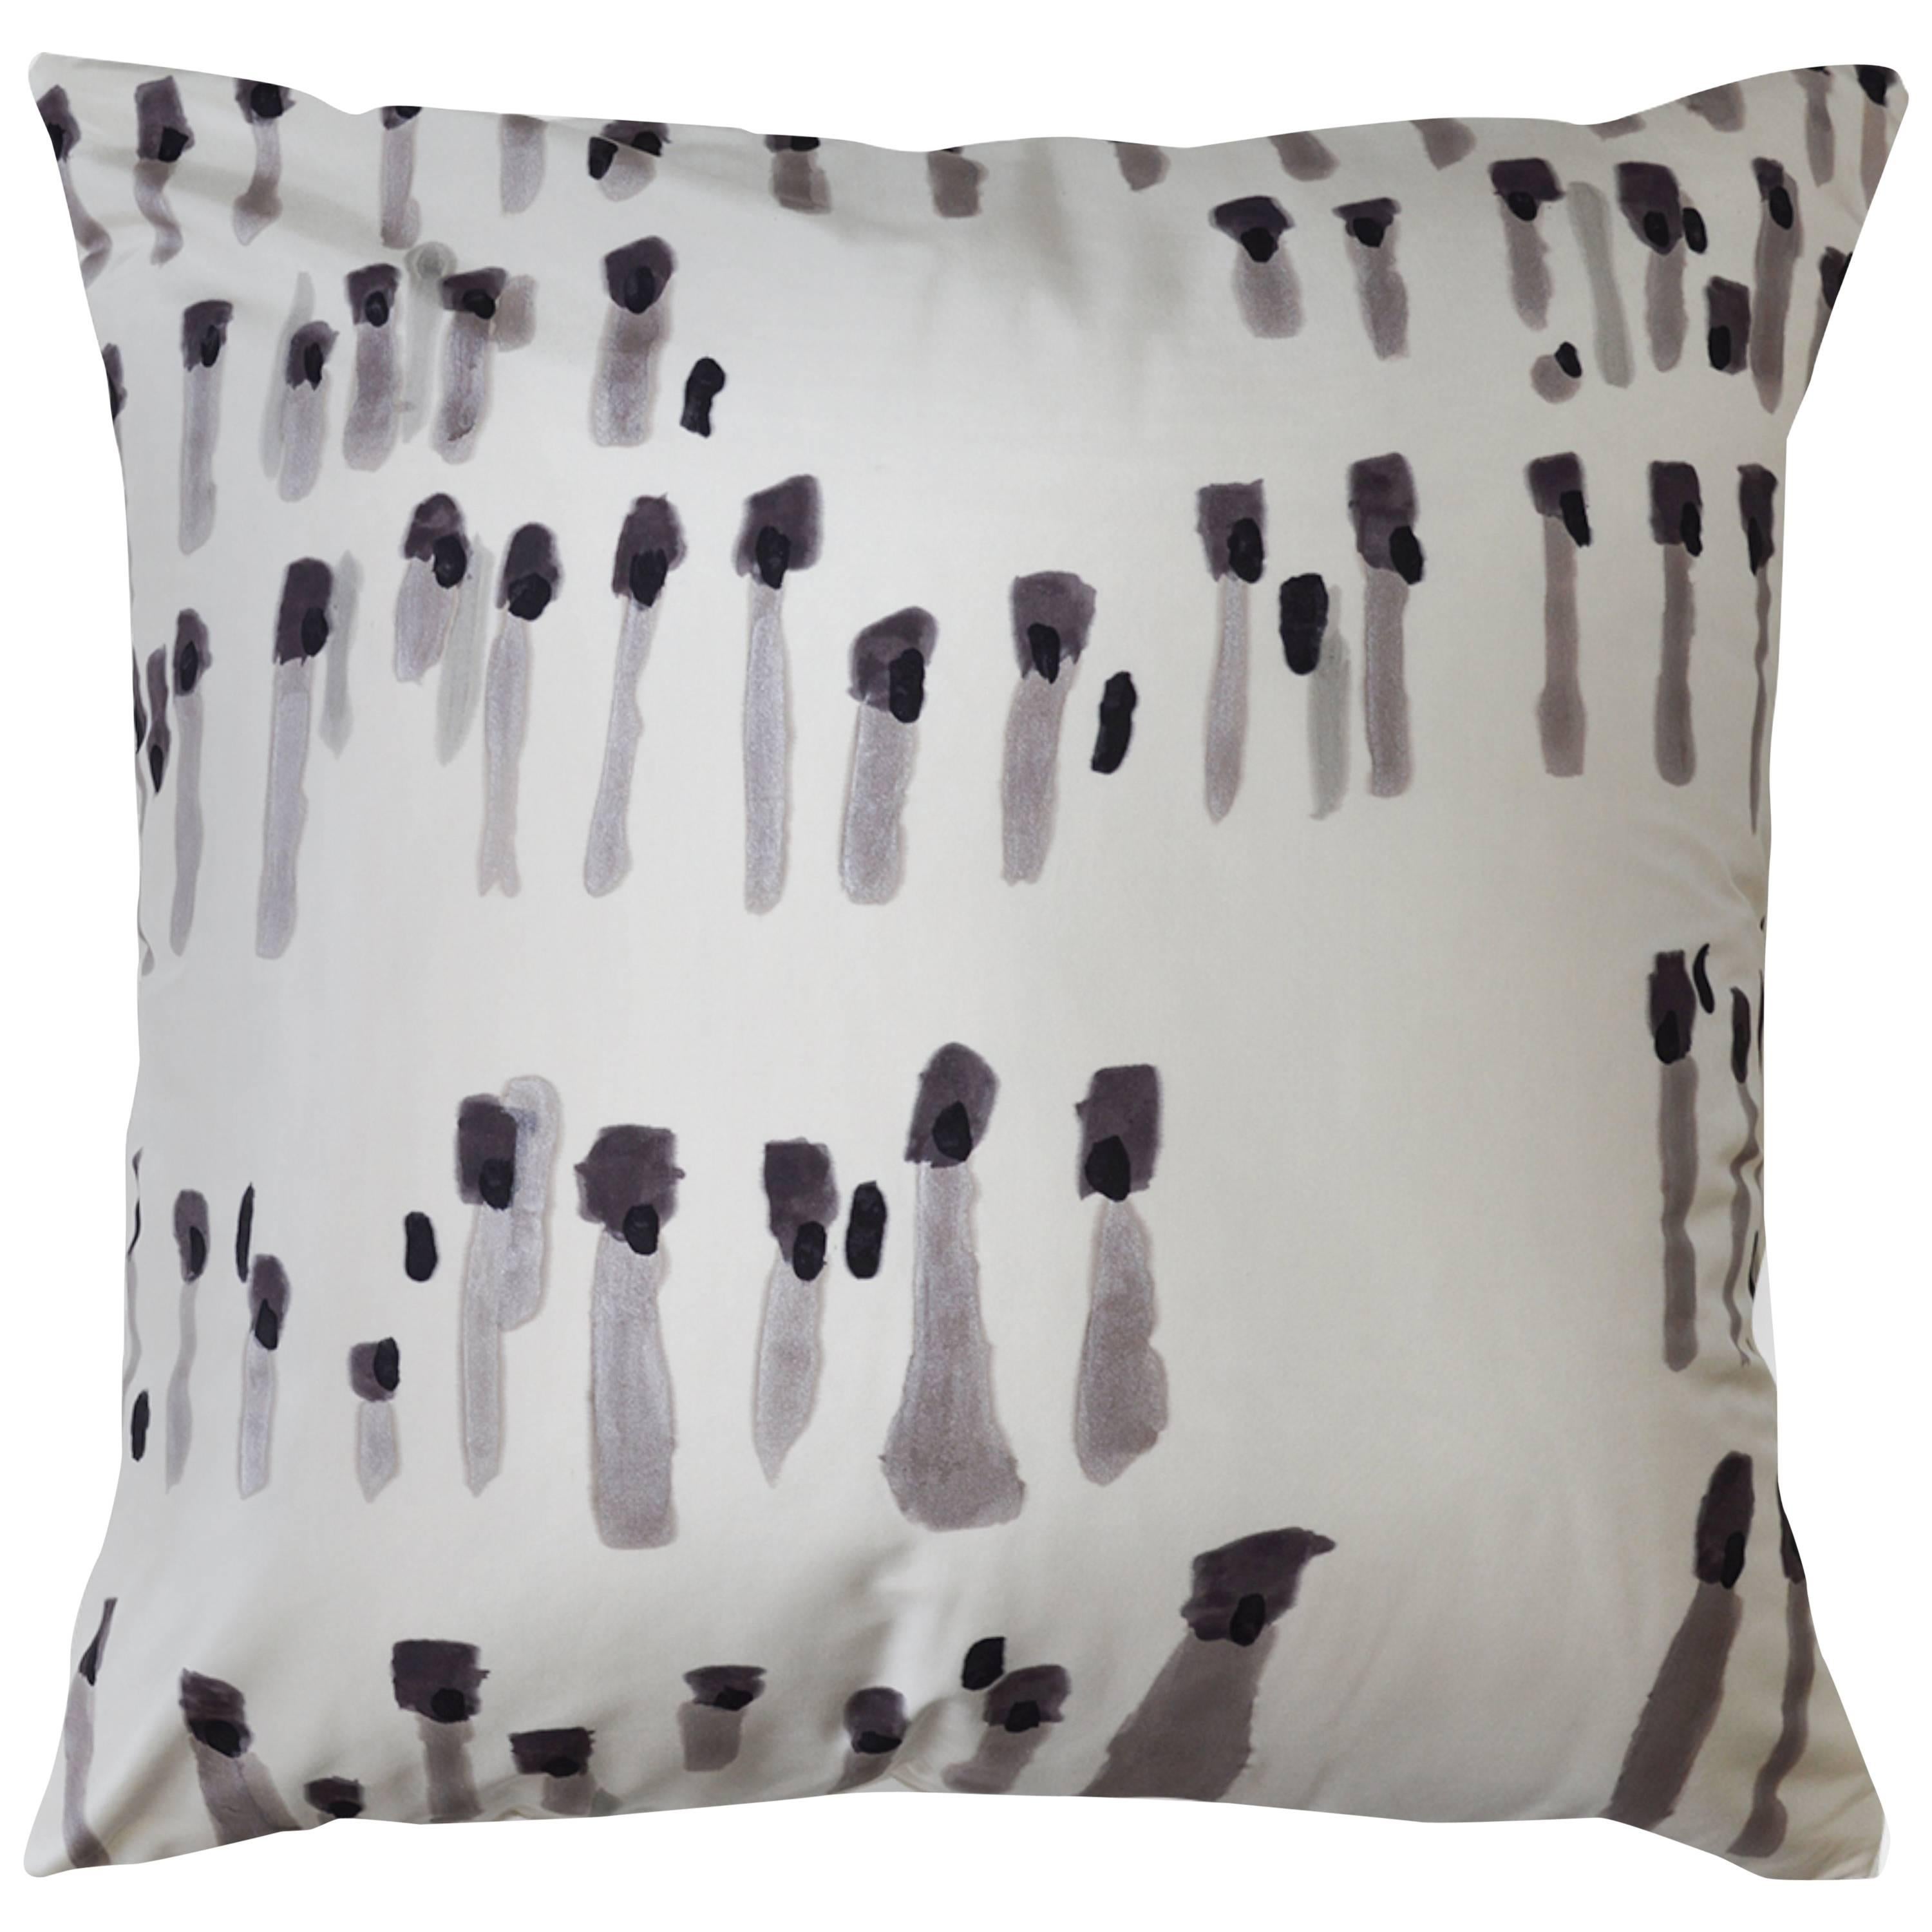 Integers Contemporary One-of-a-kind Black, Grey, and White Handmade Linen Pillow For Sale